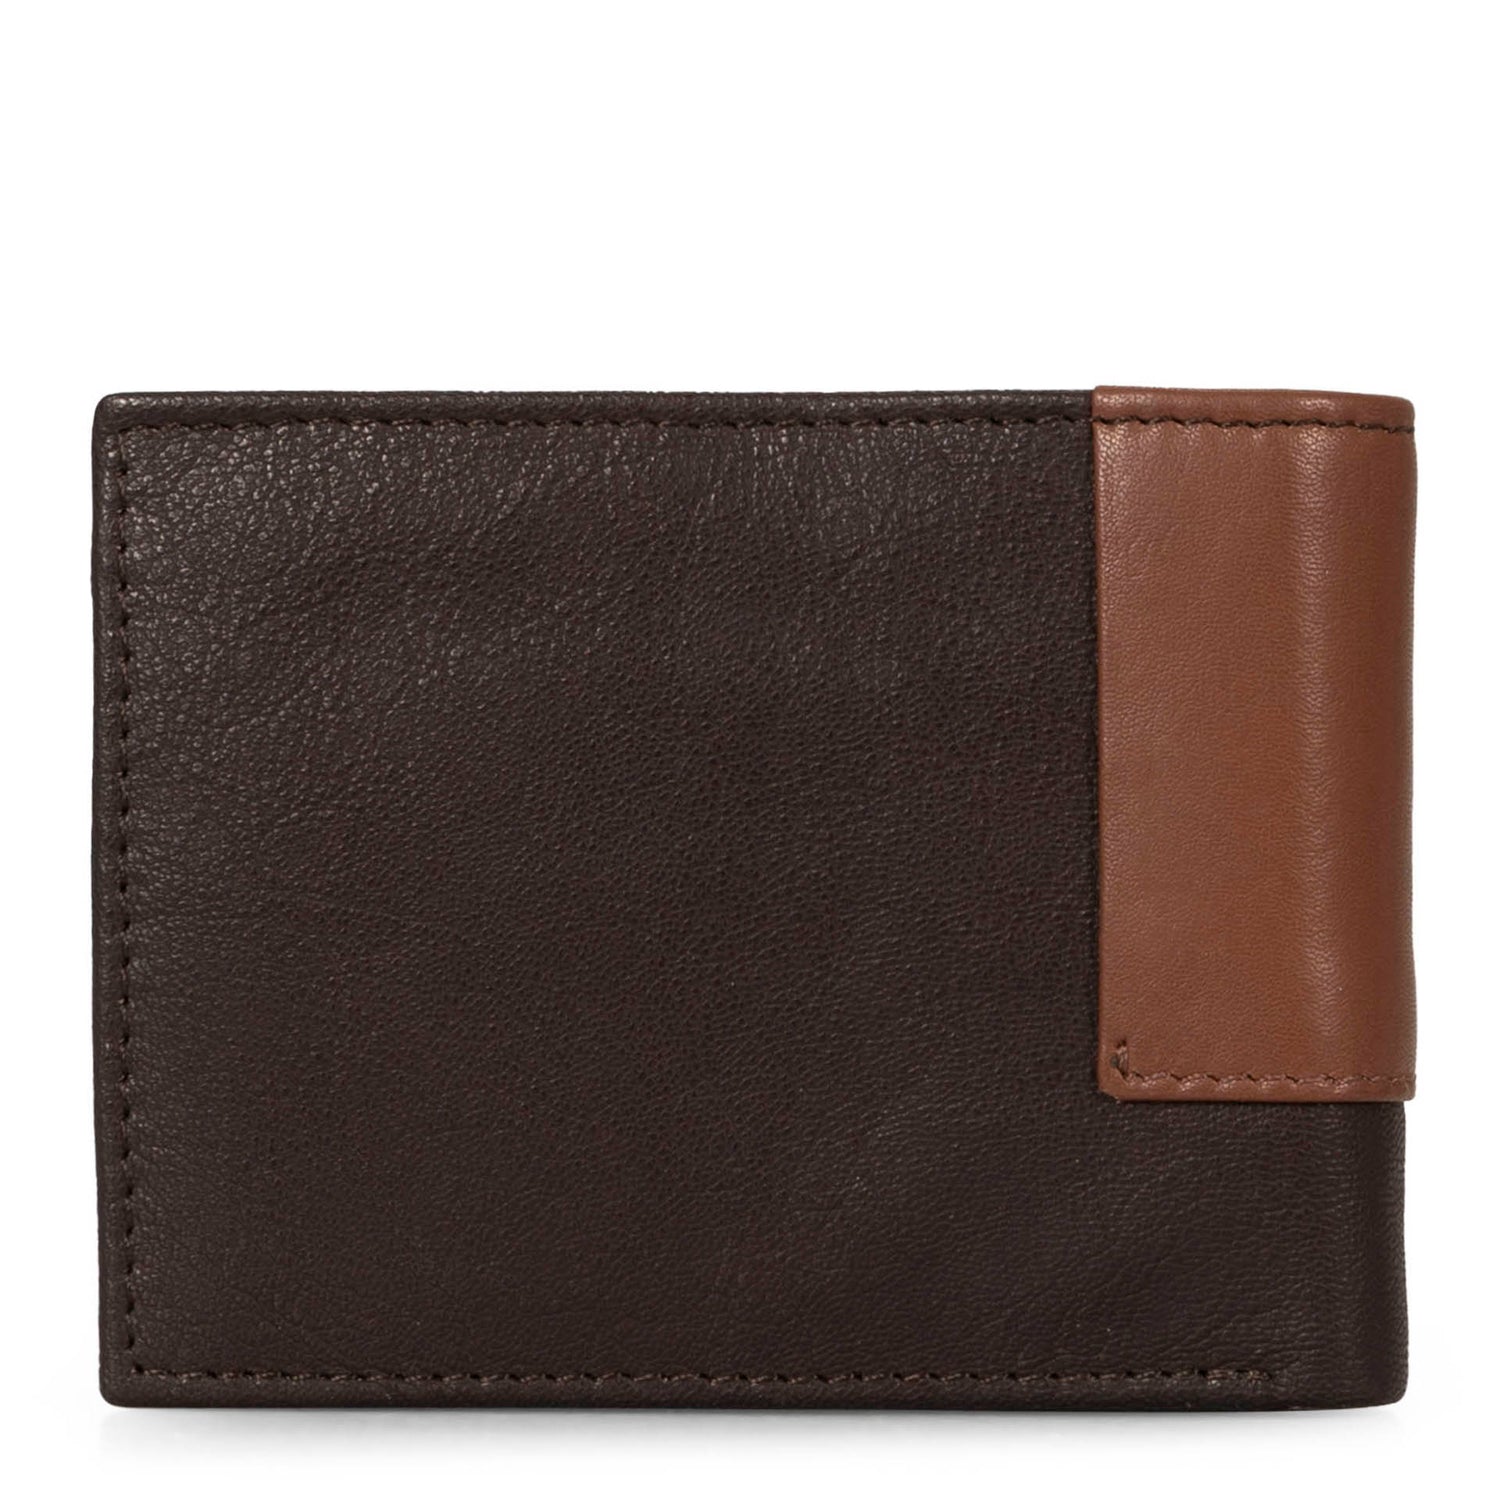 Back side of a two-toned brown cognac leather wallet called colwood designed by Tracker, show casing its supple texture.